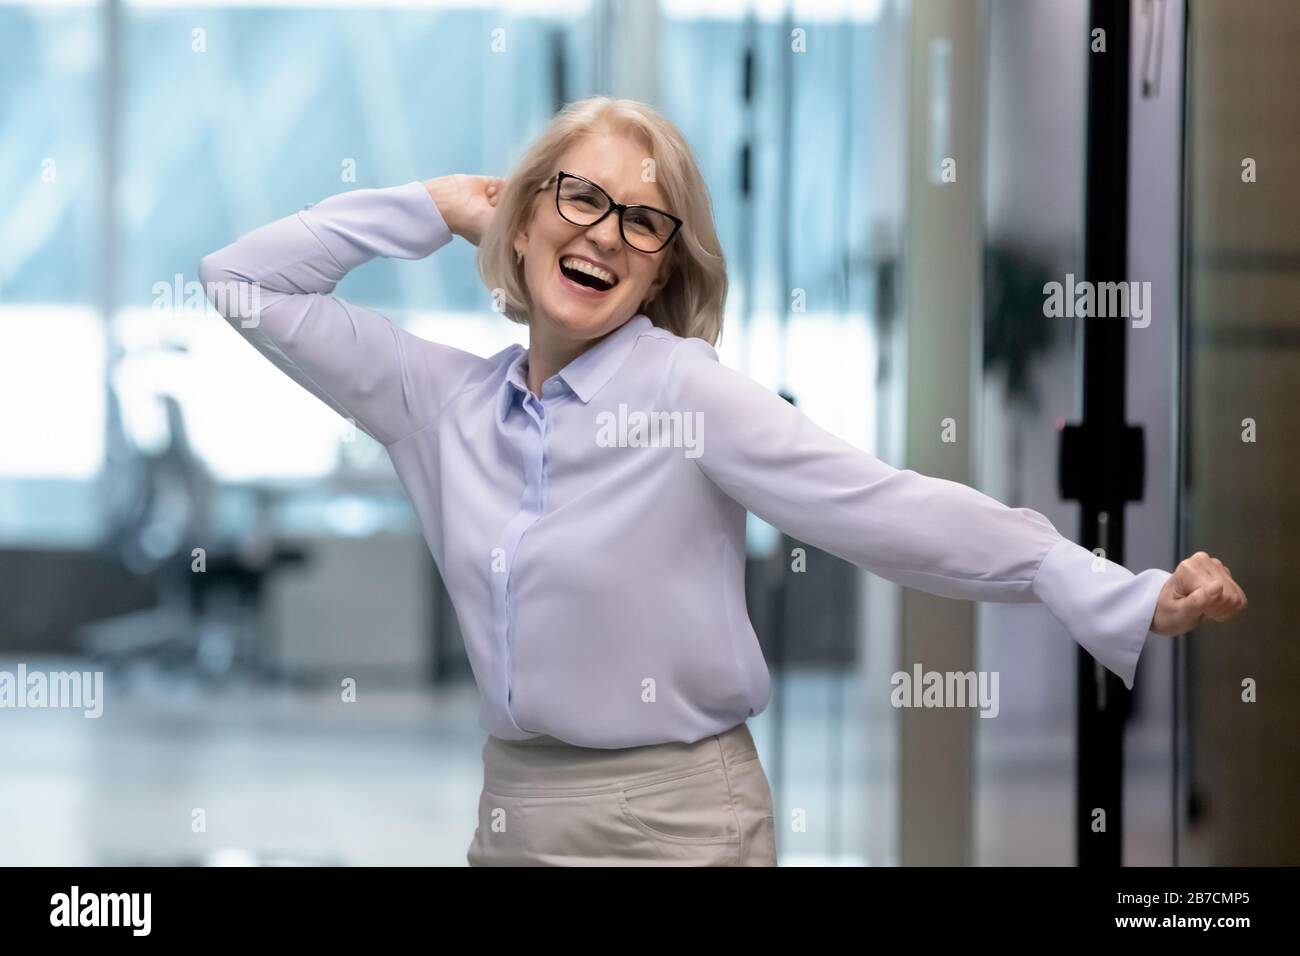 Overjoyed middle-aged businesswoman have fun celebrating work success Stock Photo